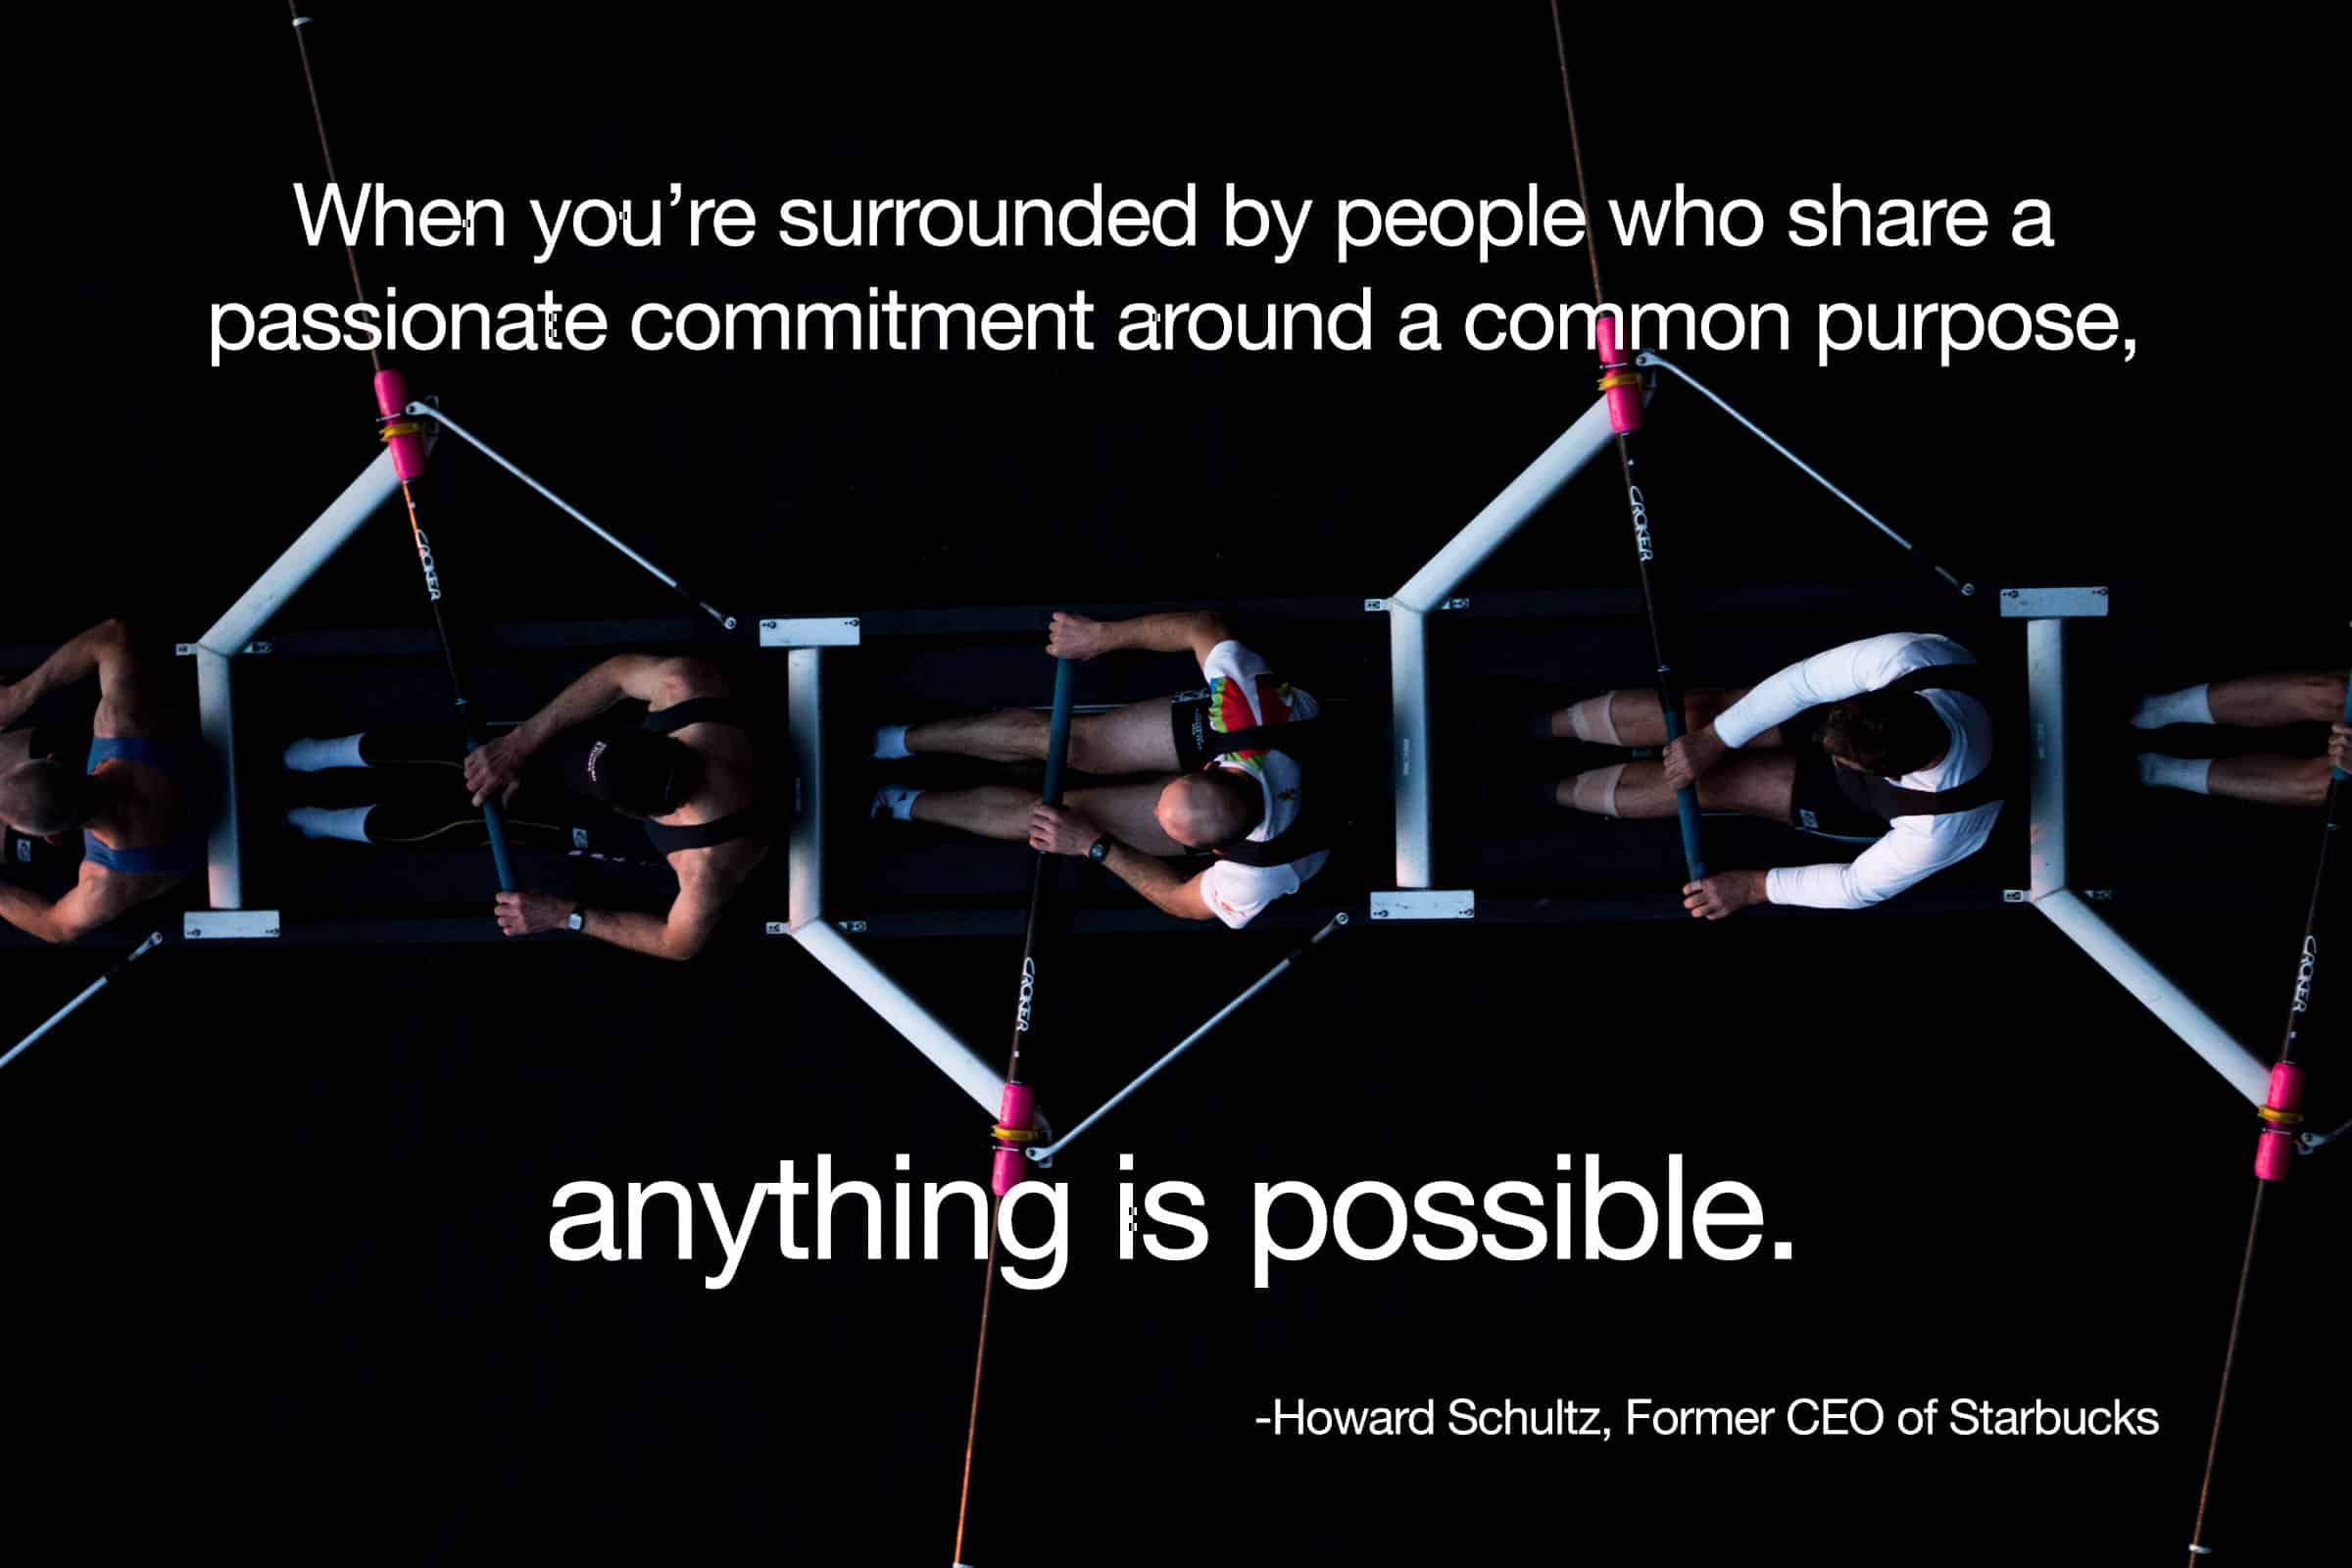 When you’re surrounded by people who share a passionate commitment around a common purpose, anything is possible